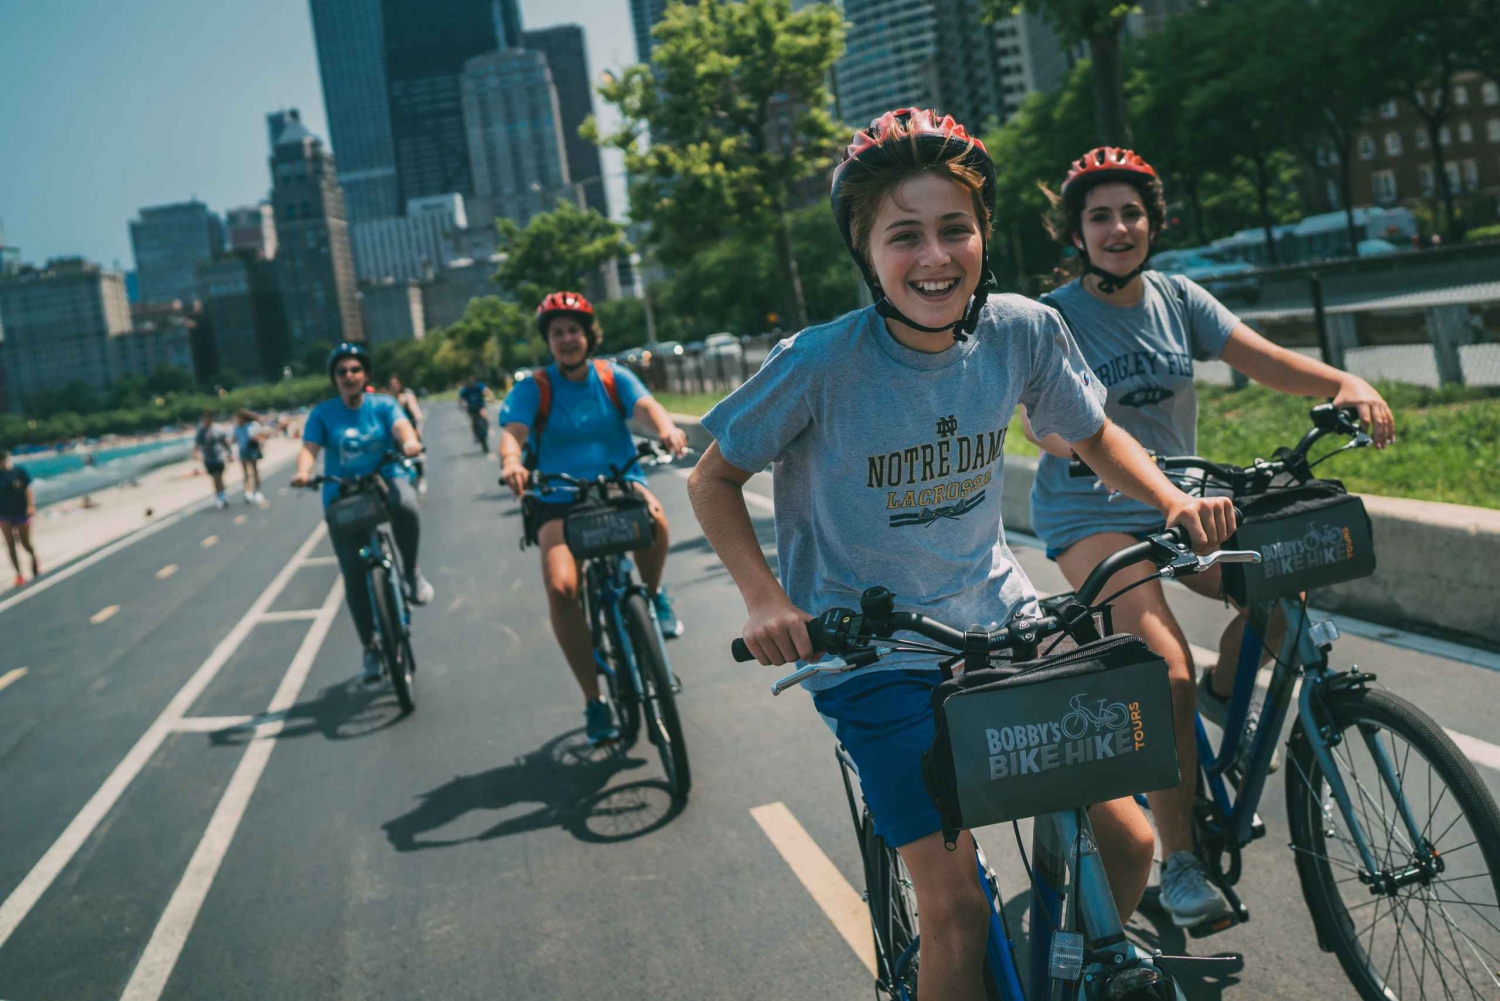 Chicago: Downtown Family Food Tour per fiets met Sightseeing